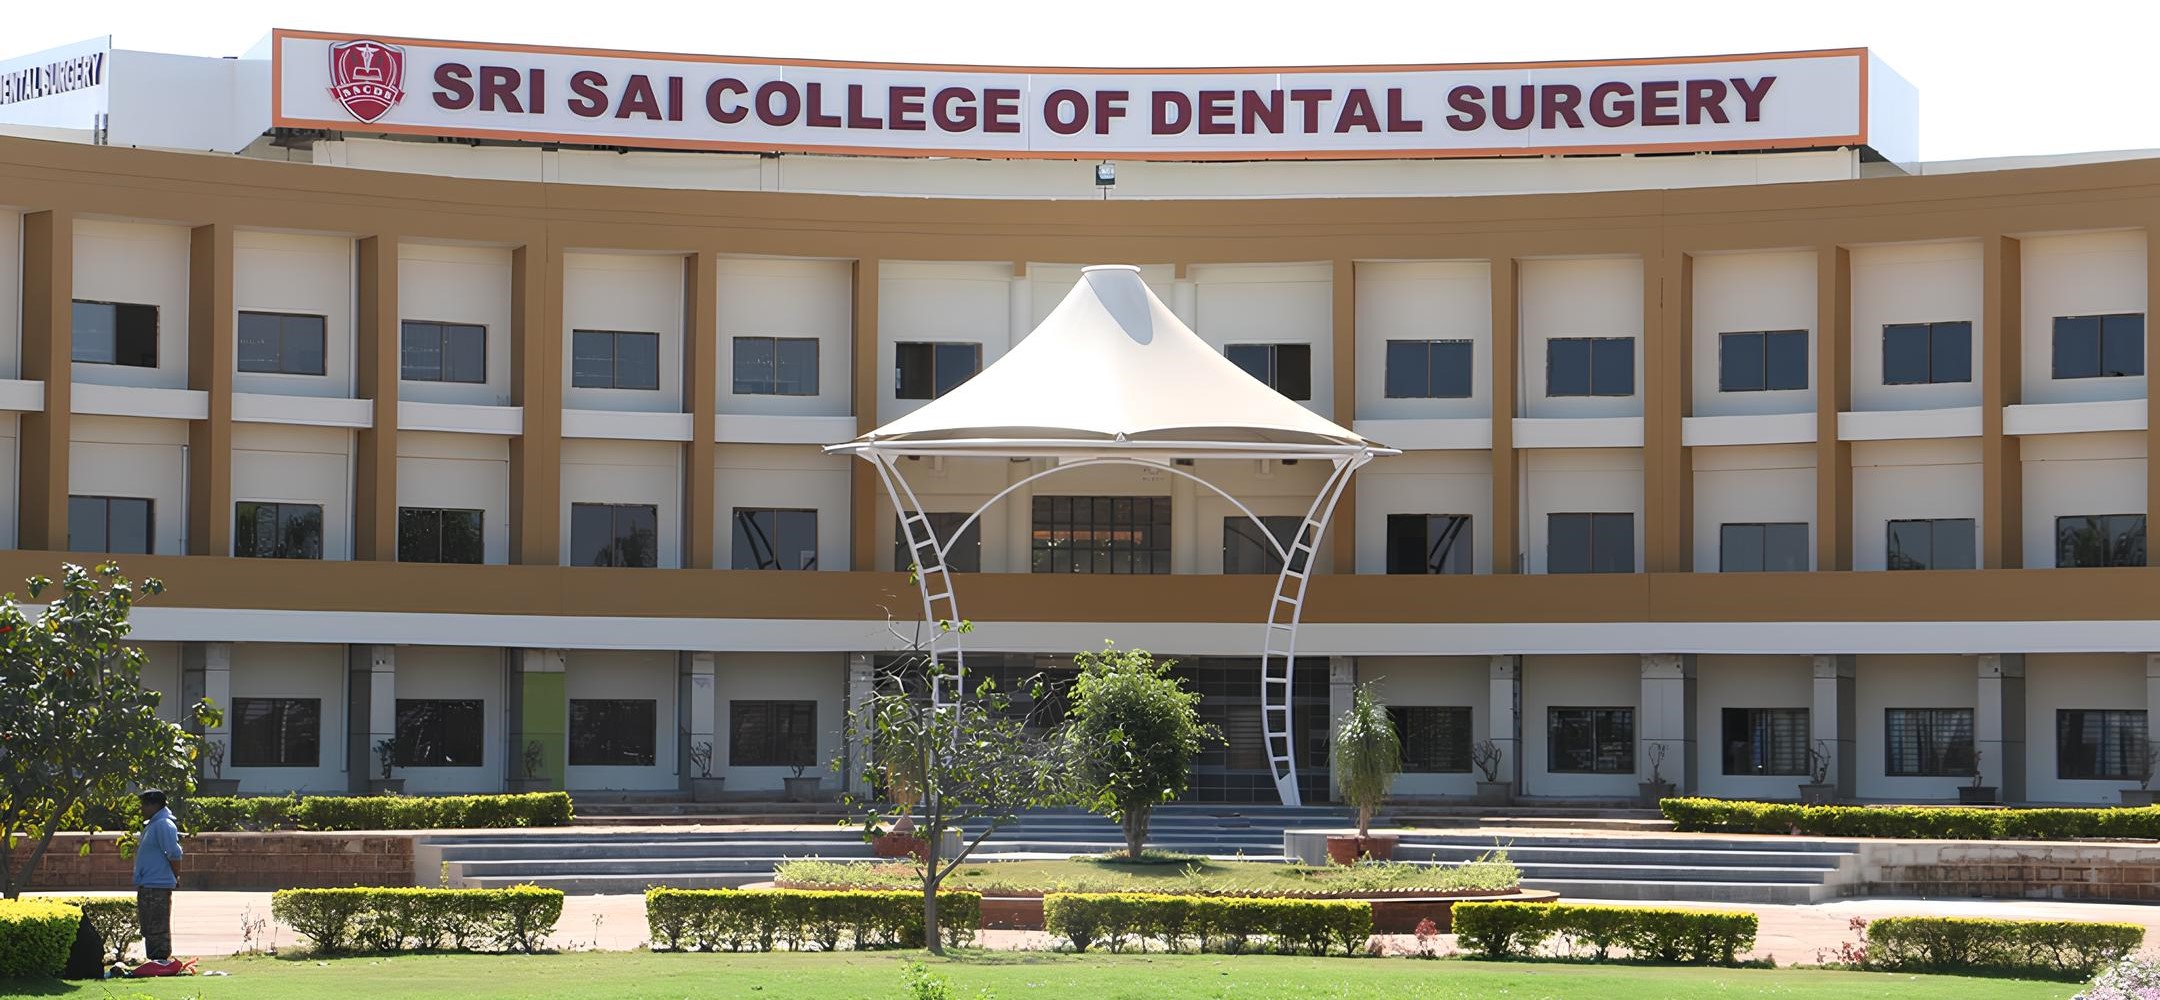 Sri Sai Dental College and Research Institute Srikakulam Admission, Courses Offered, Fees structure, Placements, Facilities